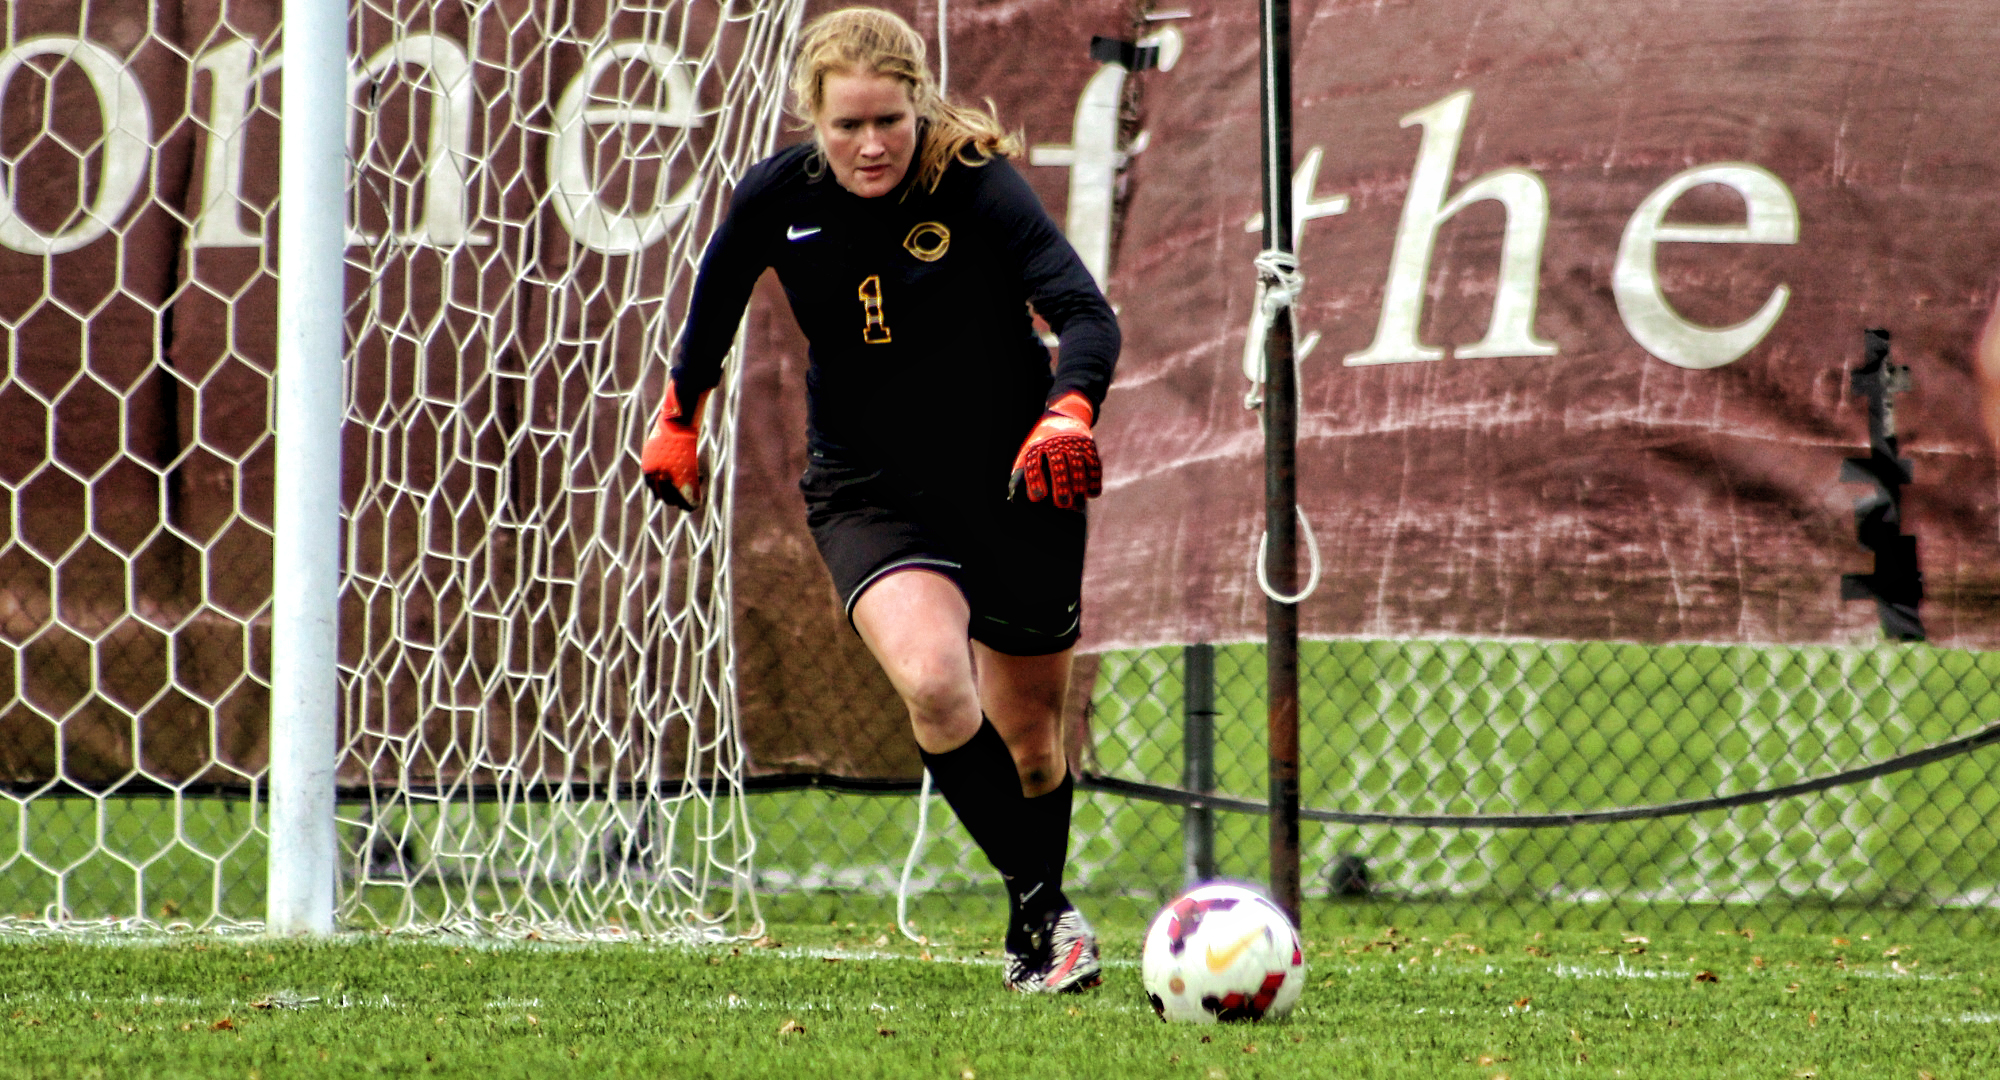 Junior goalie Maddy Reed made four saves in the Cobbers' 0-0 double overtime tie with Alma.